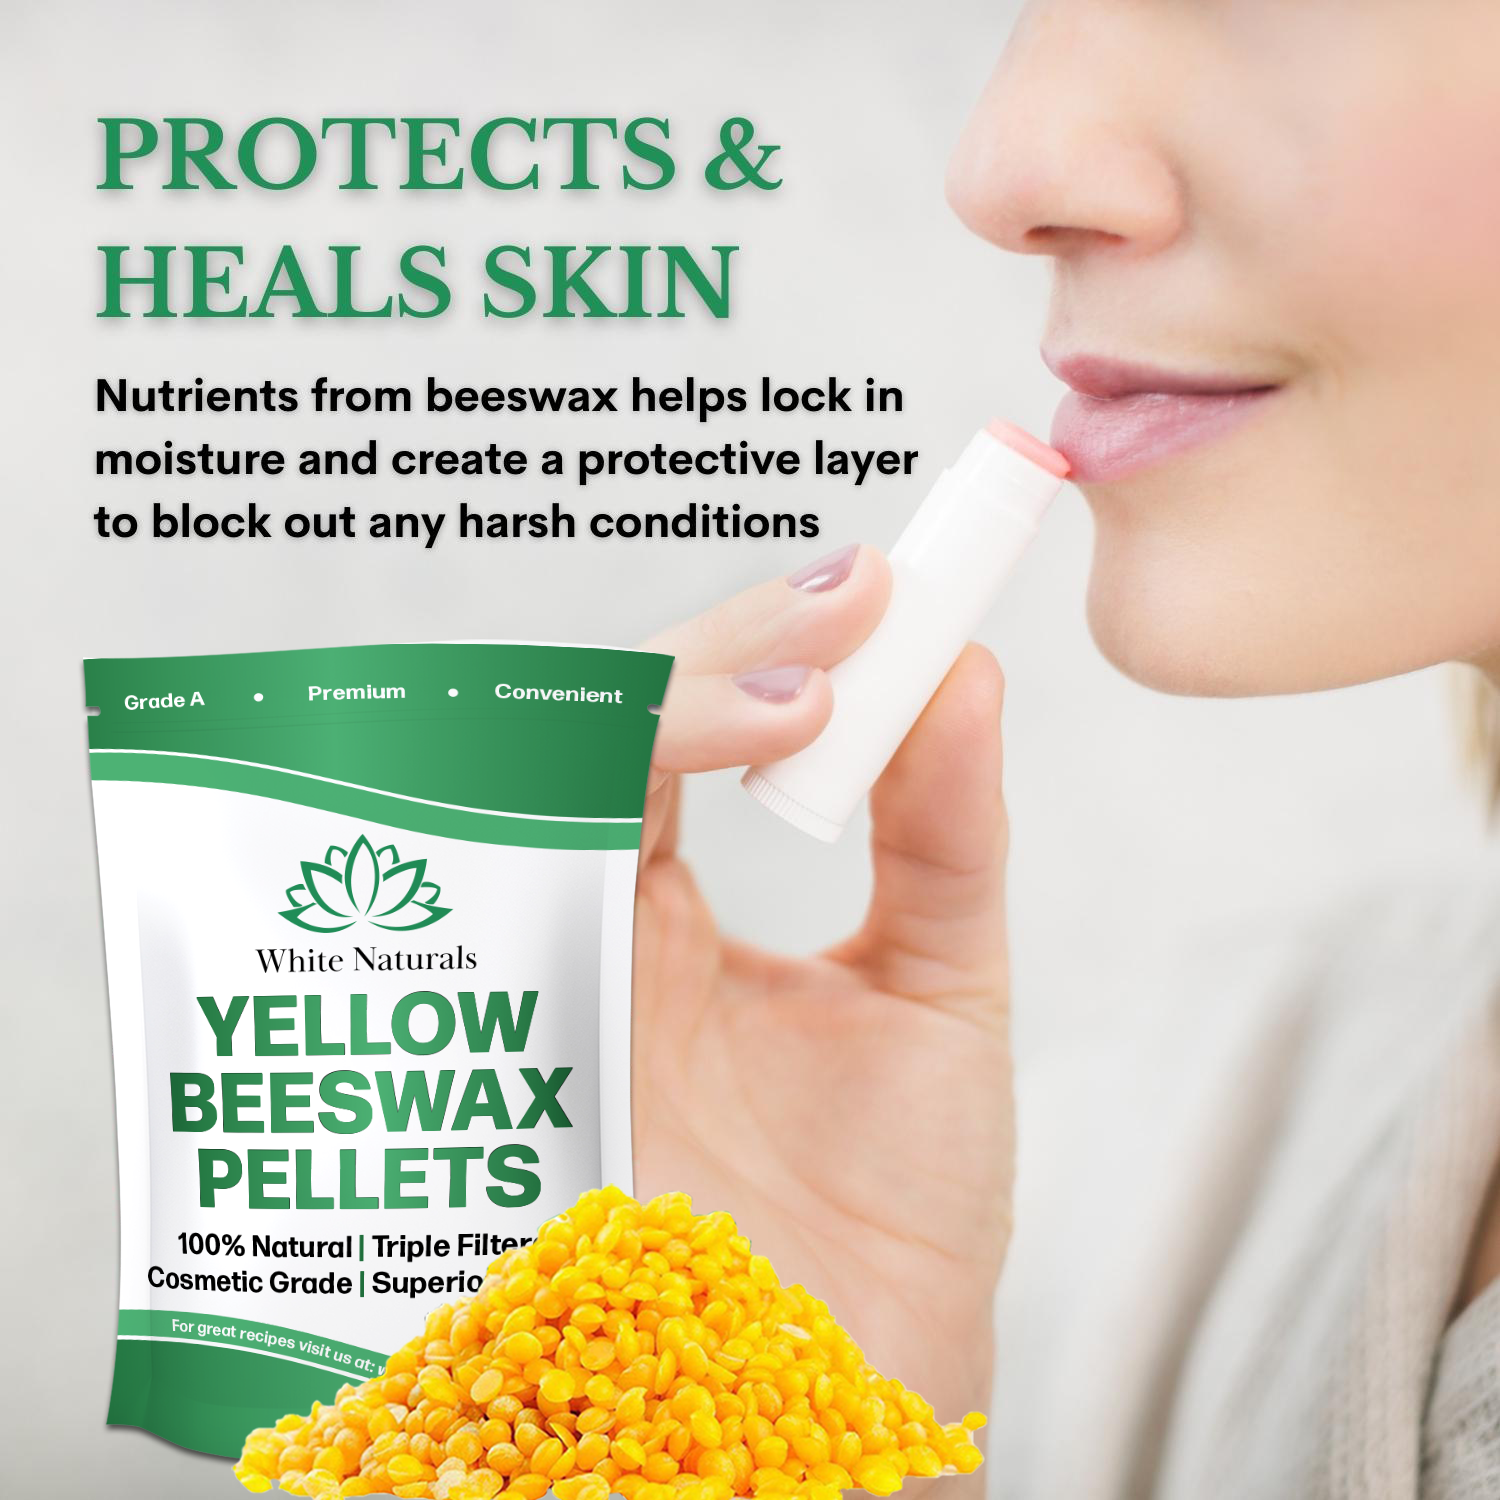 Organic Yellow Beeswax Pellets 2 lb (1 lb in each bag), Pure, Natural,  Cosmetic Grade Bees wax, Triple Filtered, Great For Diy Lip Balm, Lotions  and More - White Naturals